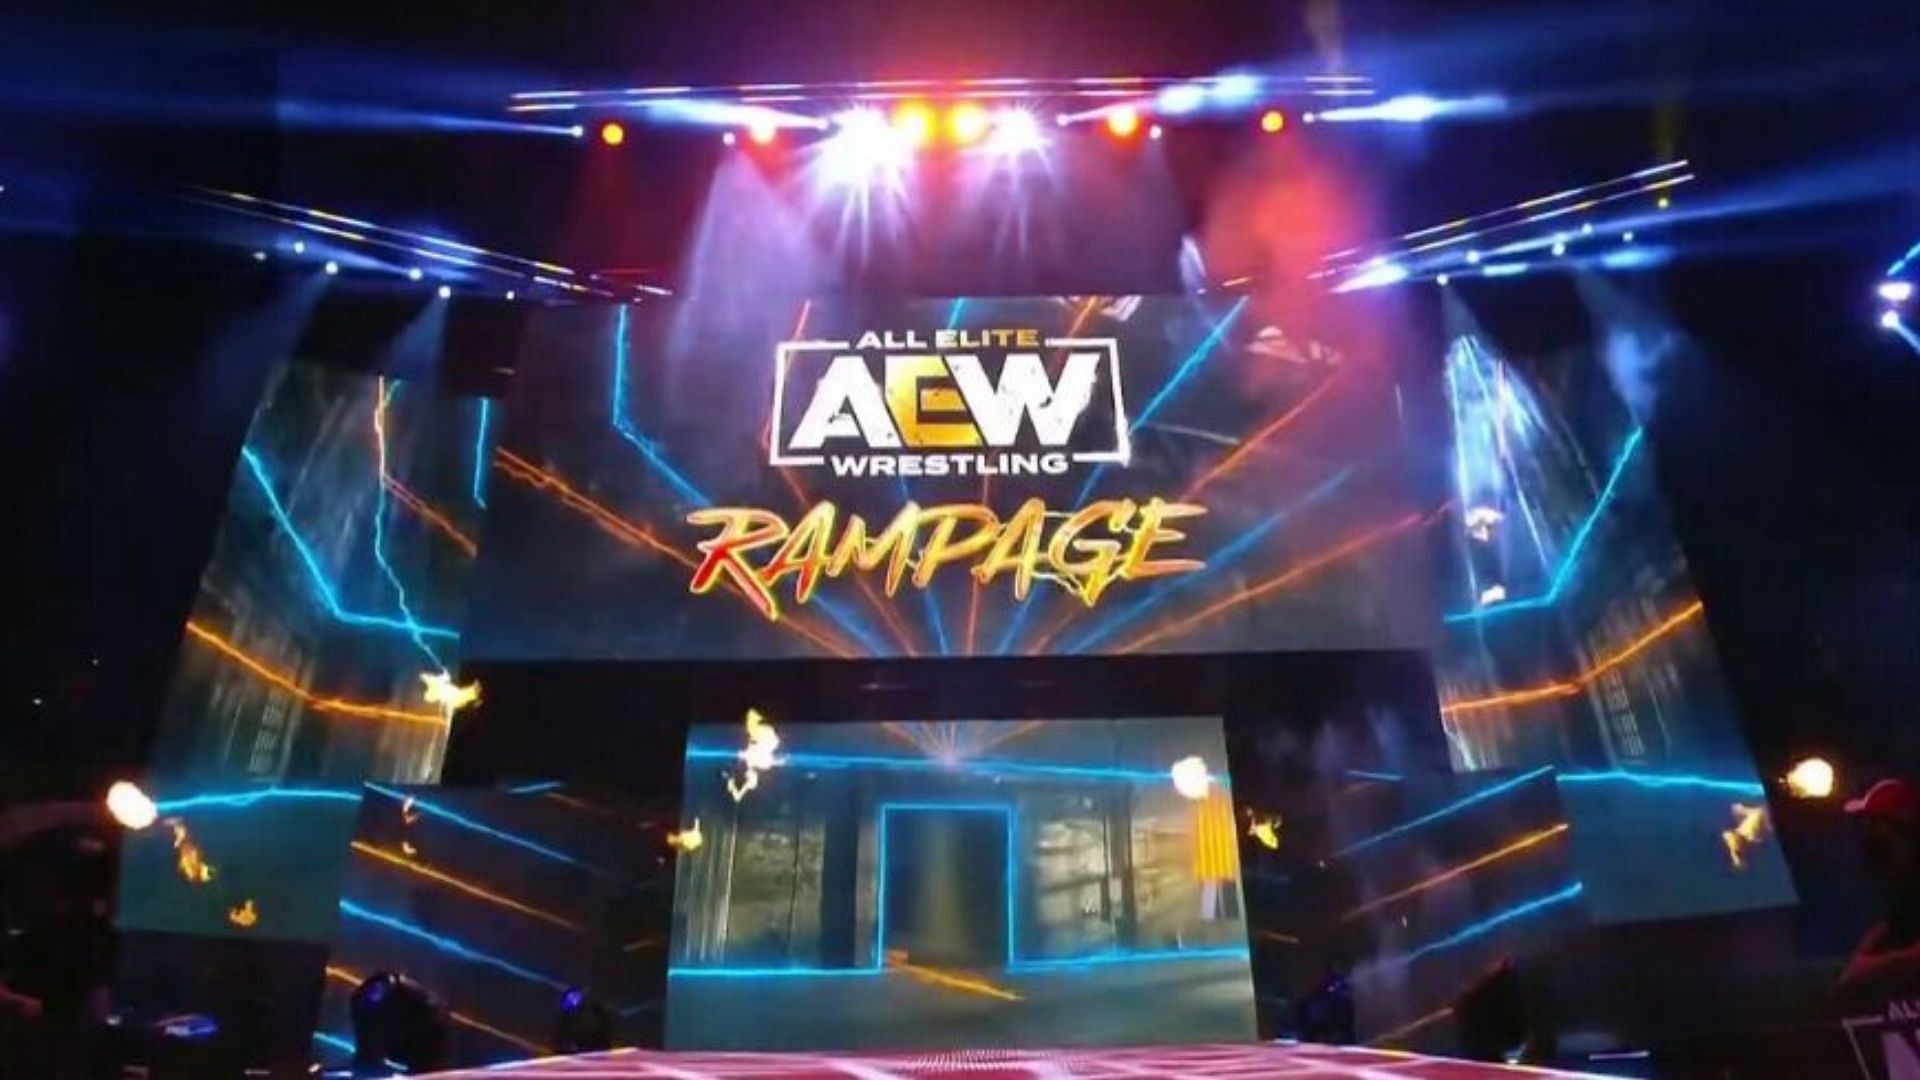 A former WWE star recently competed on AEW Rampage